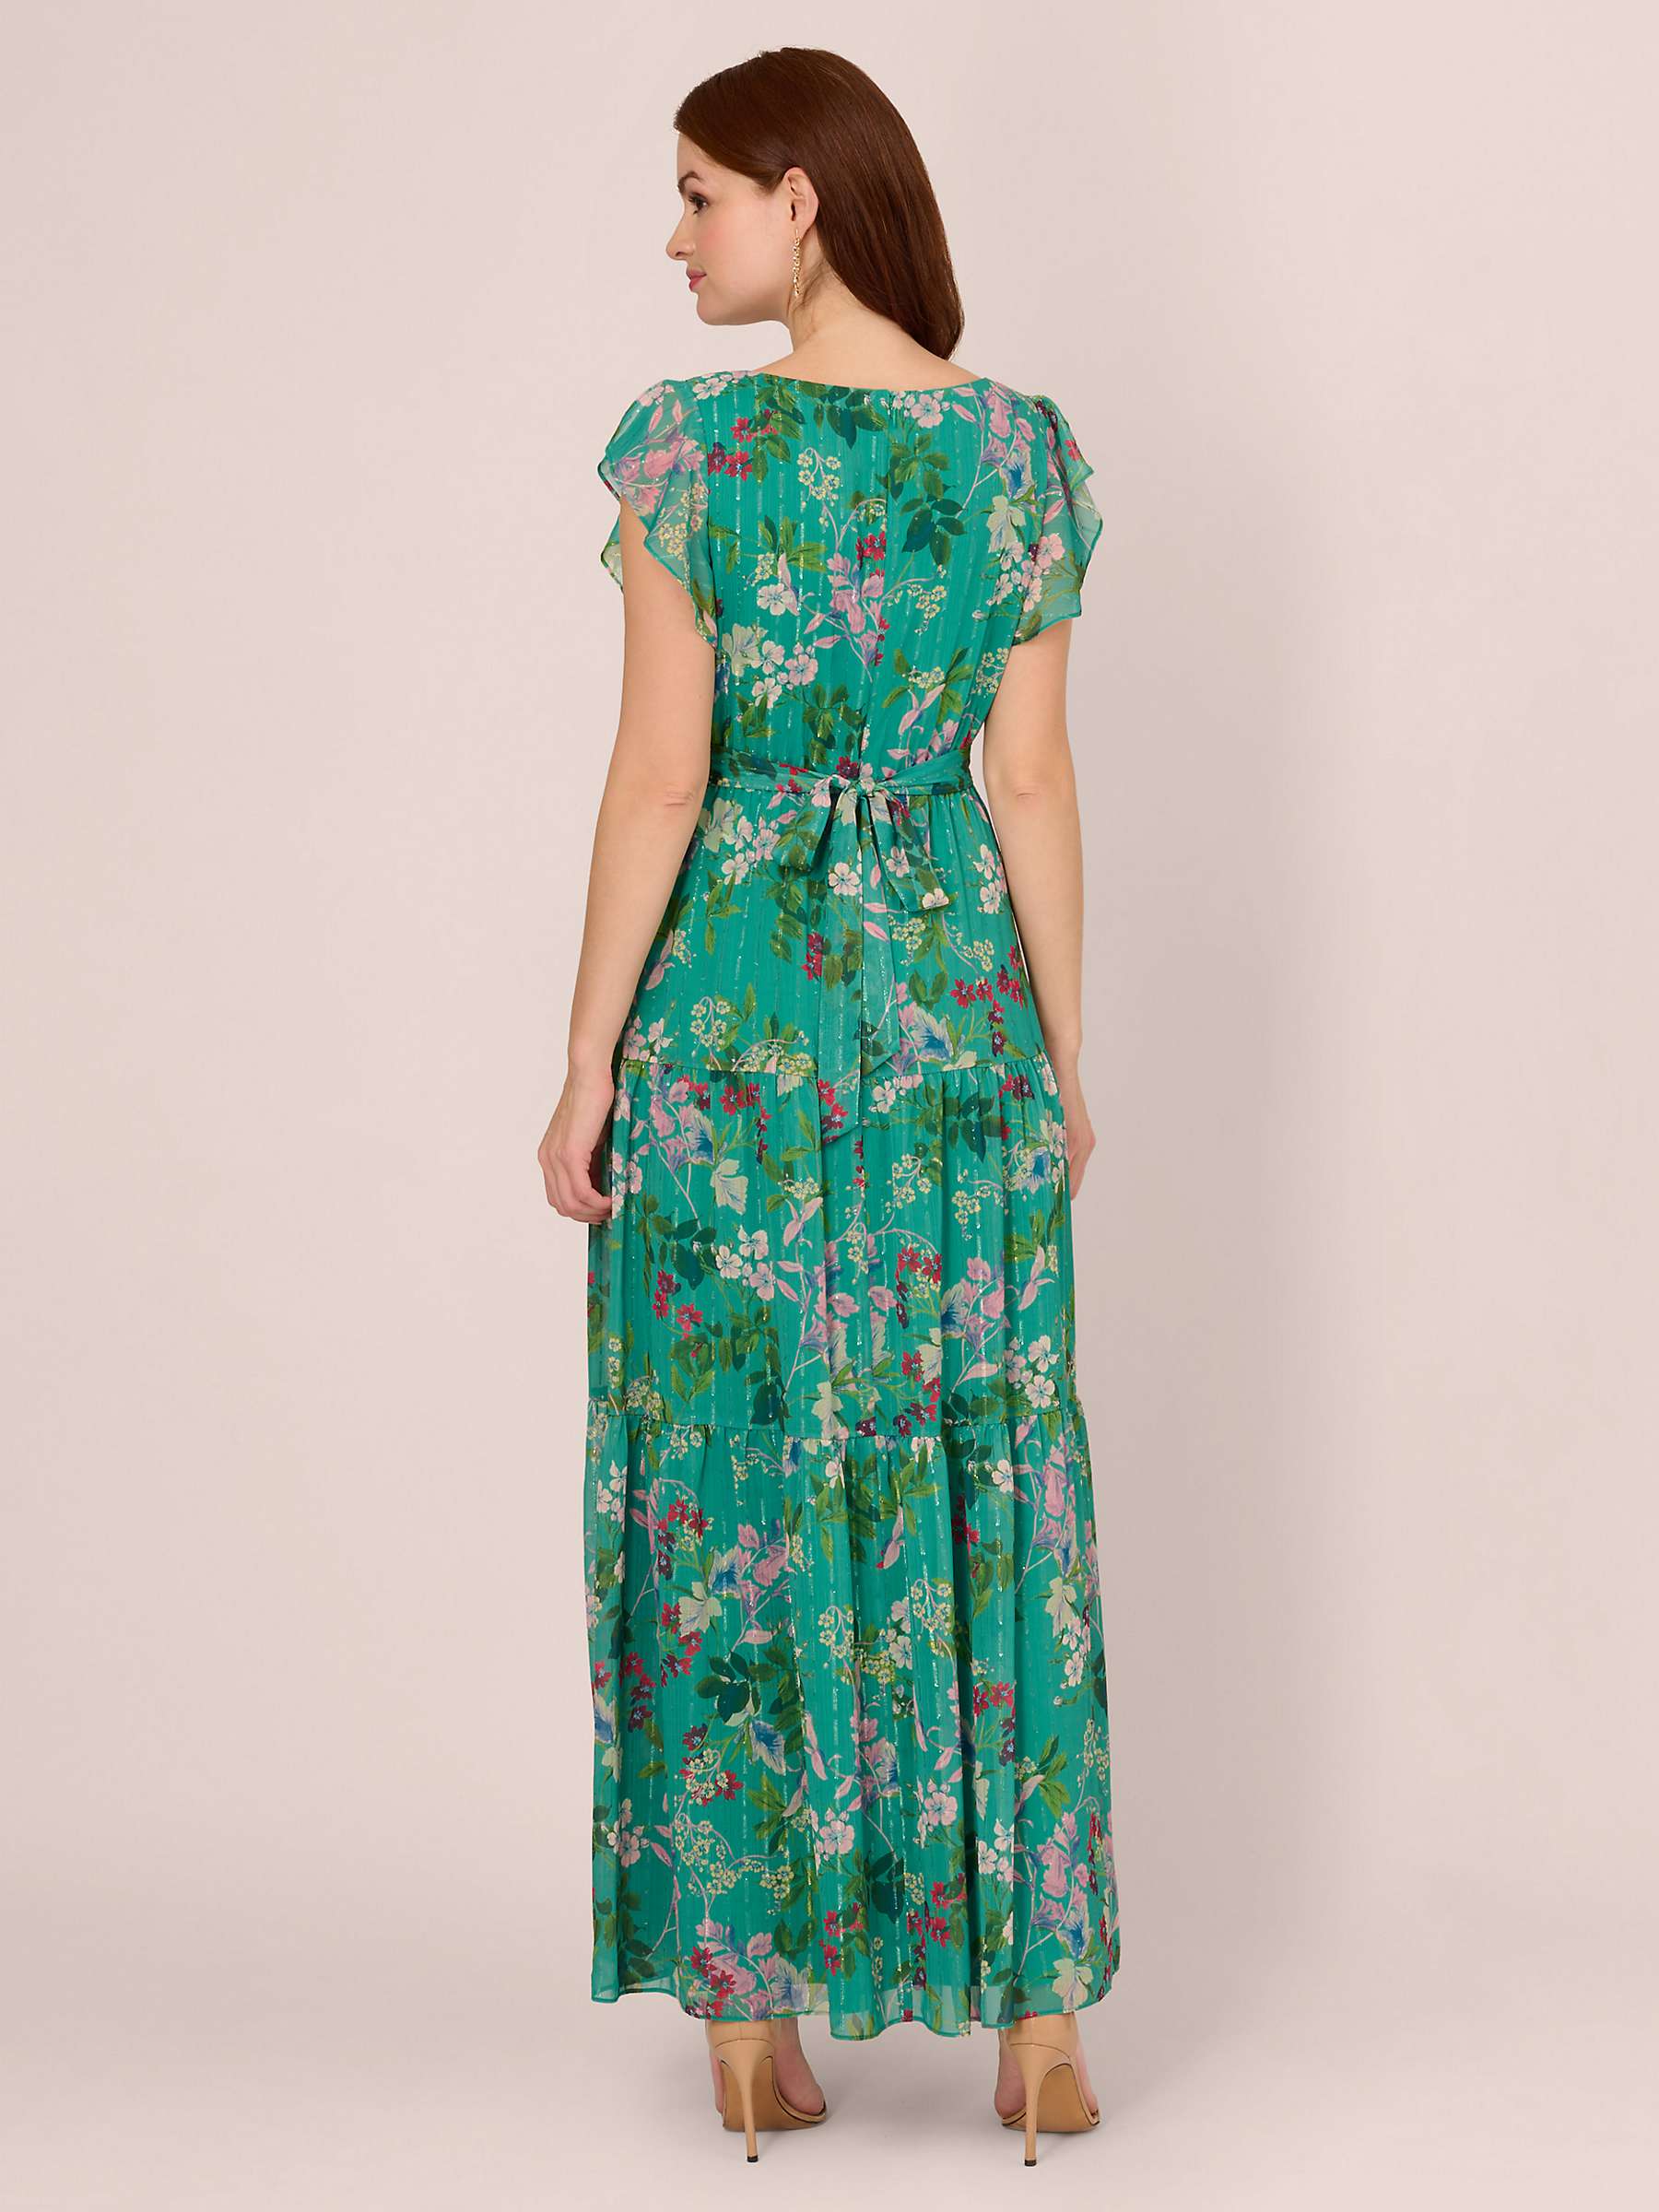 Buy Adrianna Papell Floral Tiered Maxi Dress, Green/Multi Online at johnlewis.com